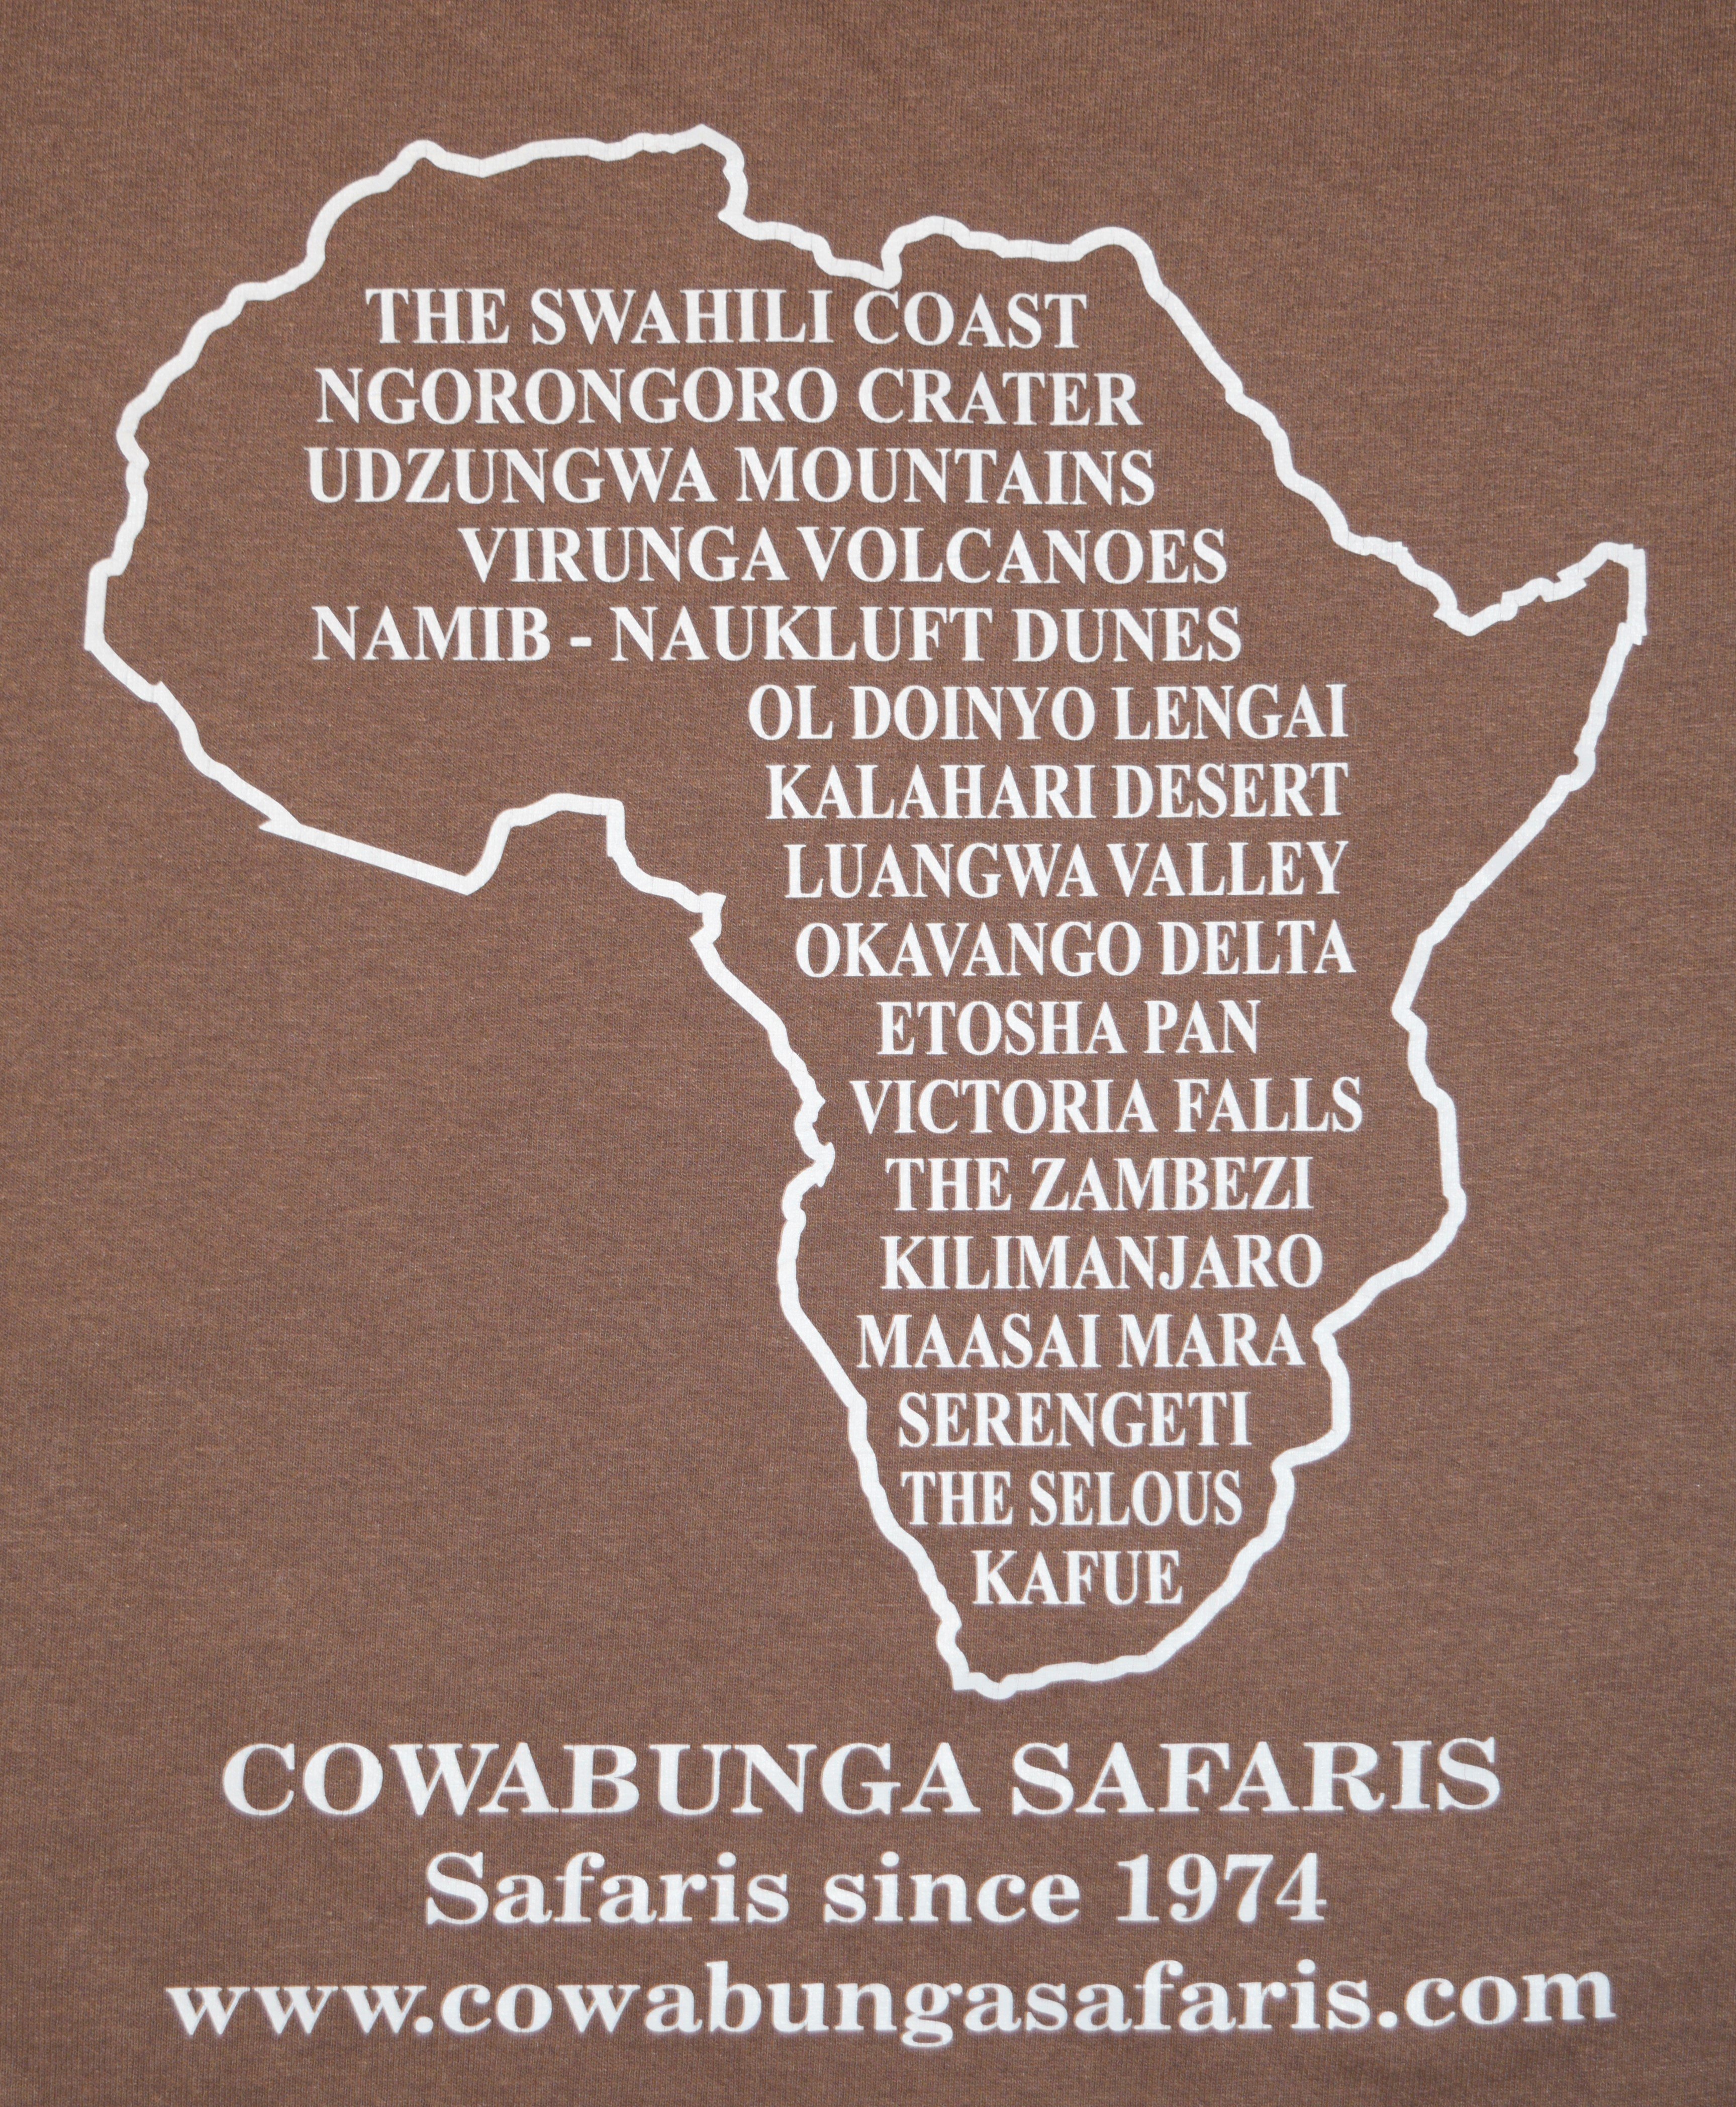 Select Cowabunga Destinations --  Our safaris range from rustic to upscale. We customize our safaris to appeal to a range of interests and abilities.